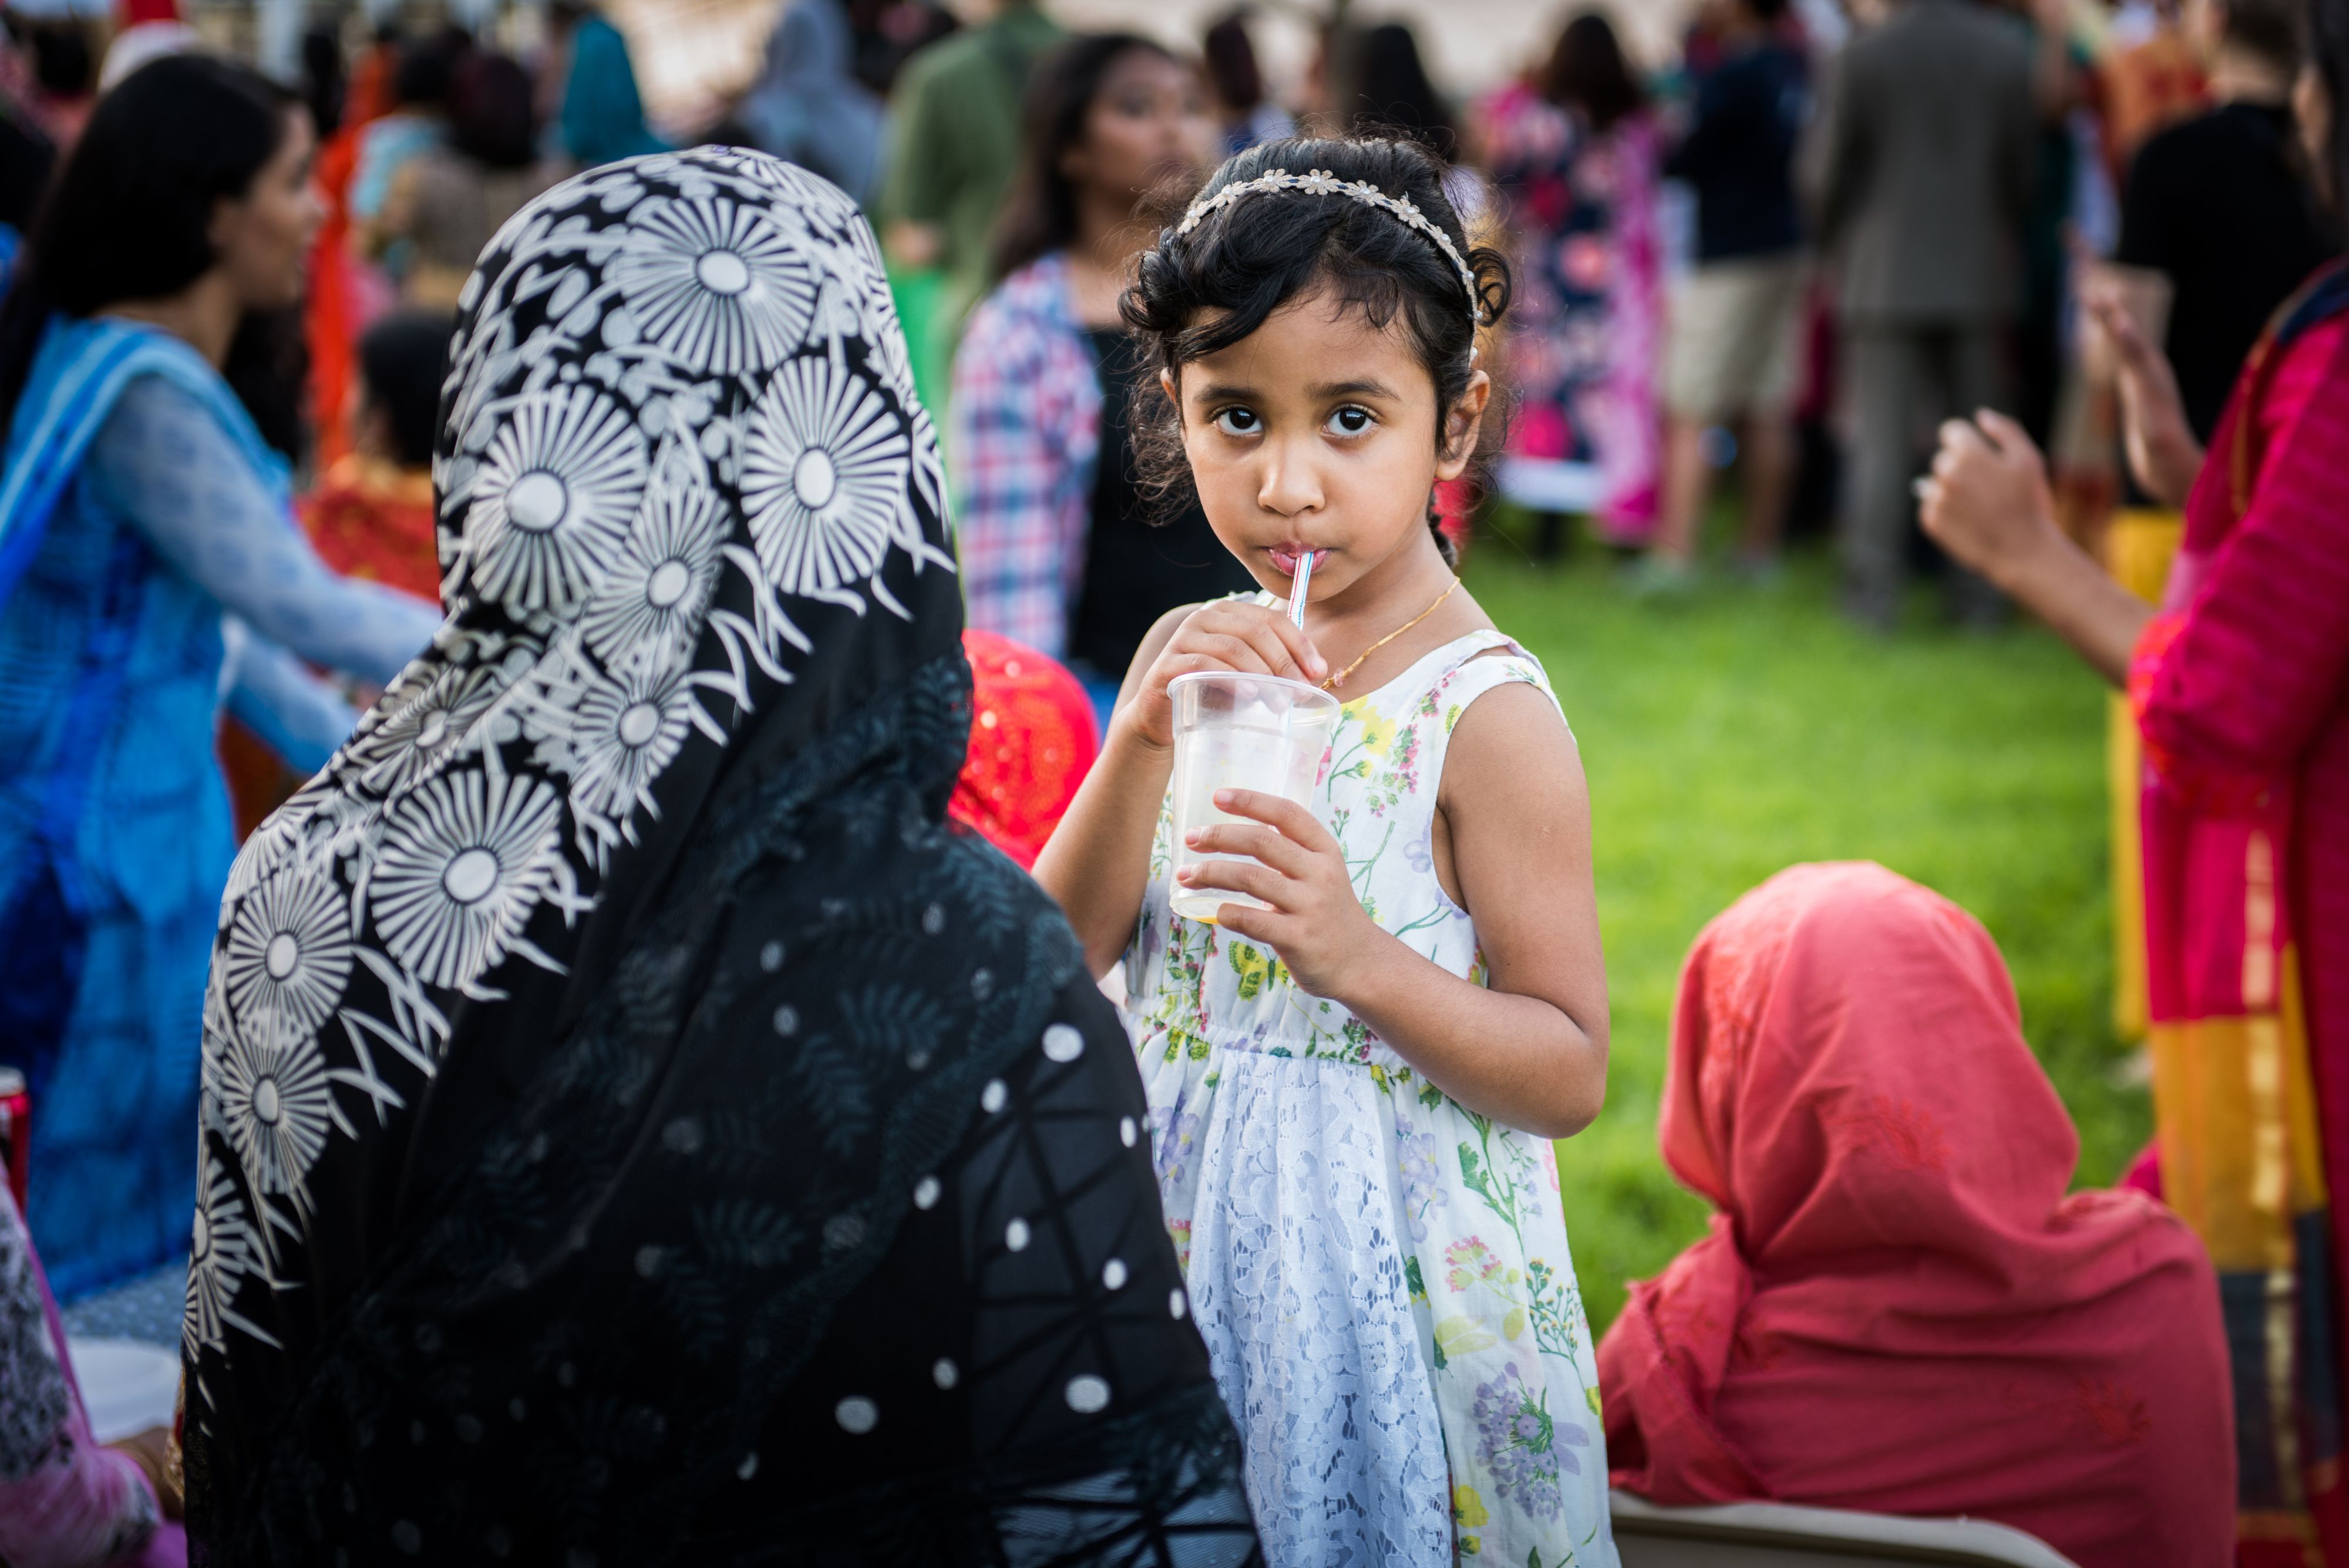 Young middle eastern girl in dress with her mother at outdoor festival having a drink